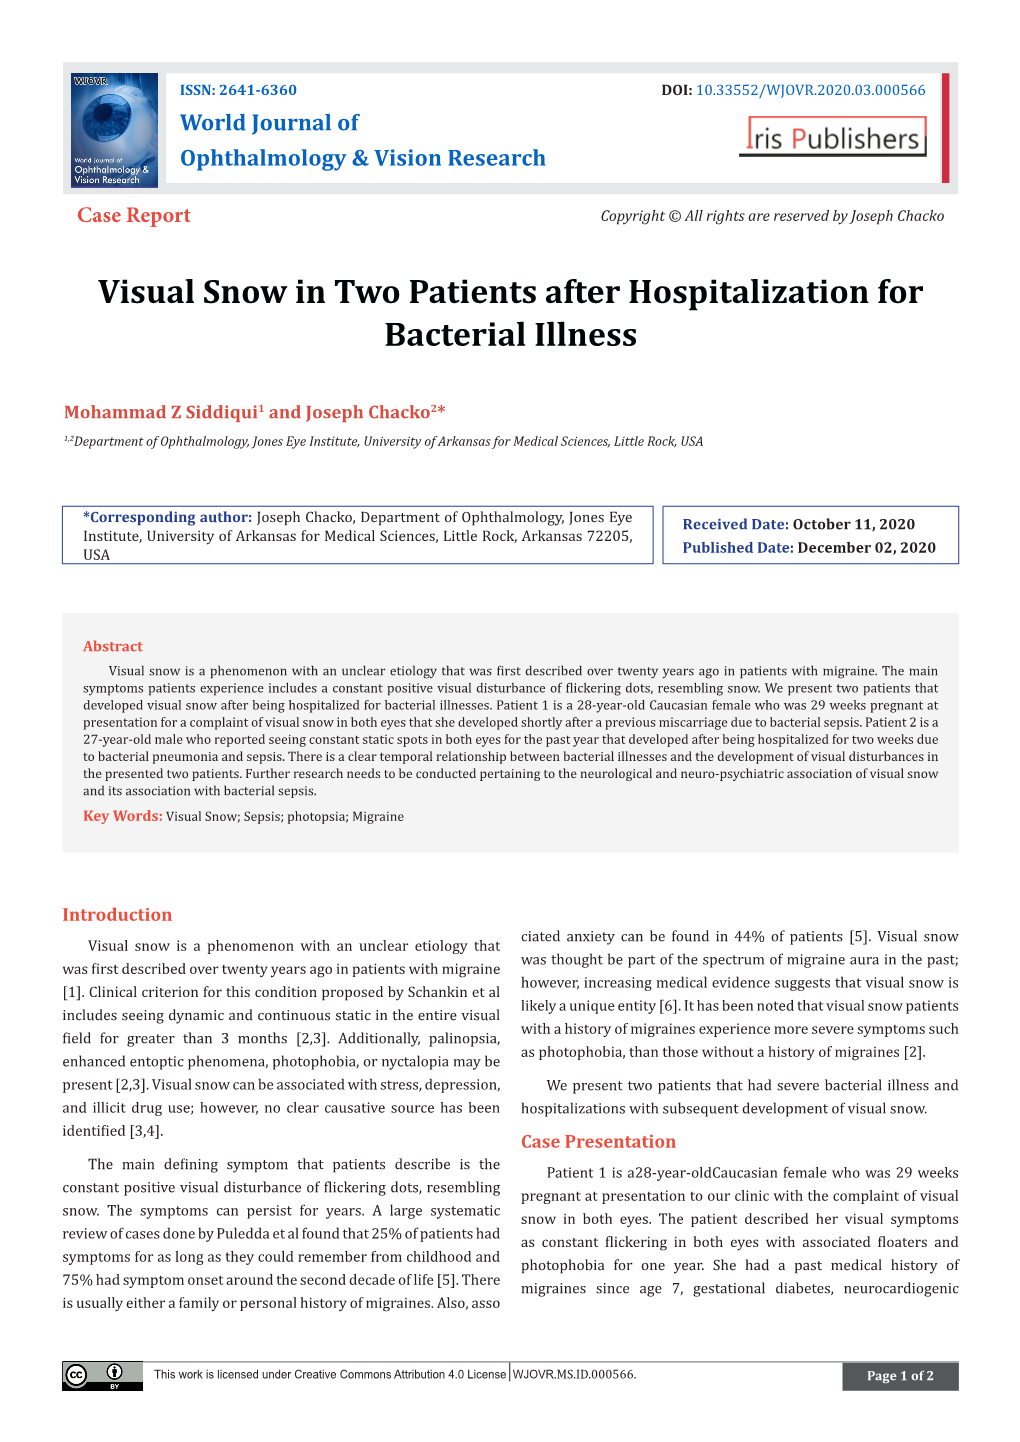 Visual Snow in Two Patients After Hospitalization for Bacterial Illness